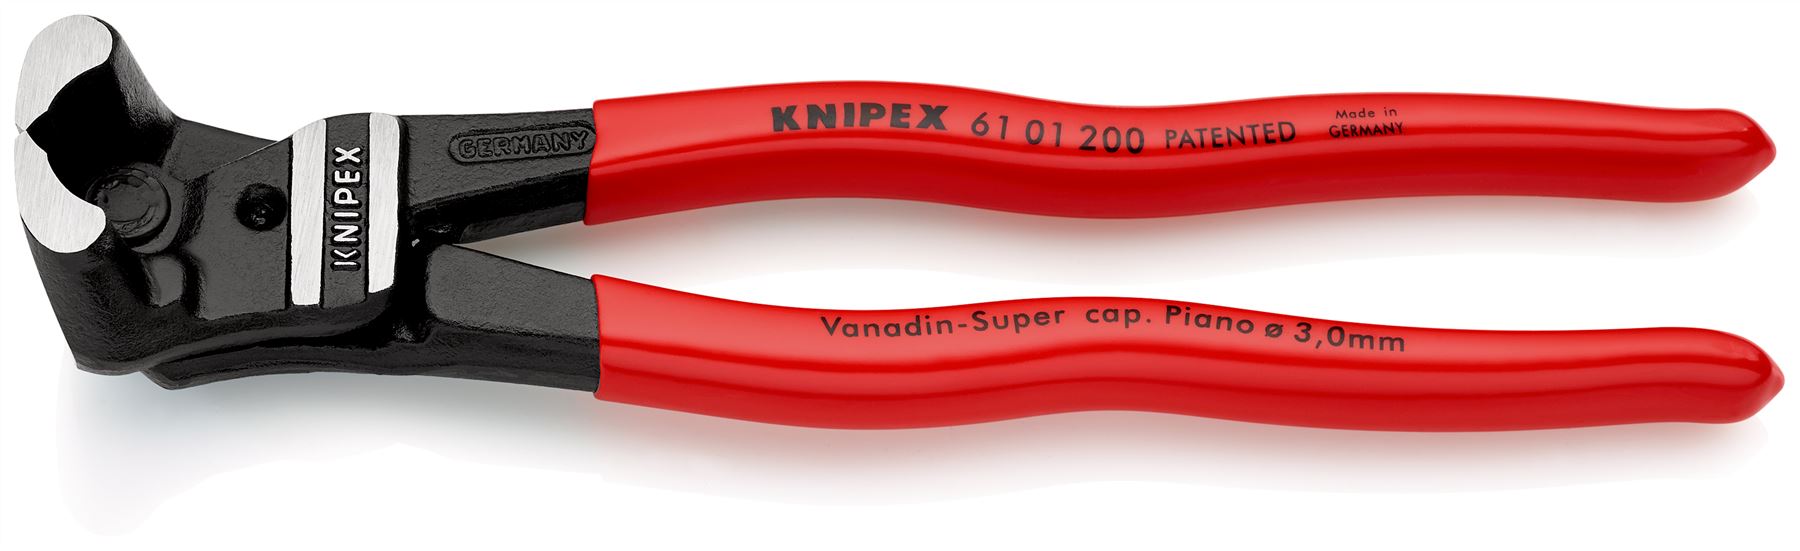 KNIPEX Bolt End Cutting Nipper Pliers High Lever Transmission 200mm Plastic Coated 61 01 200